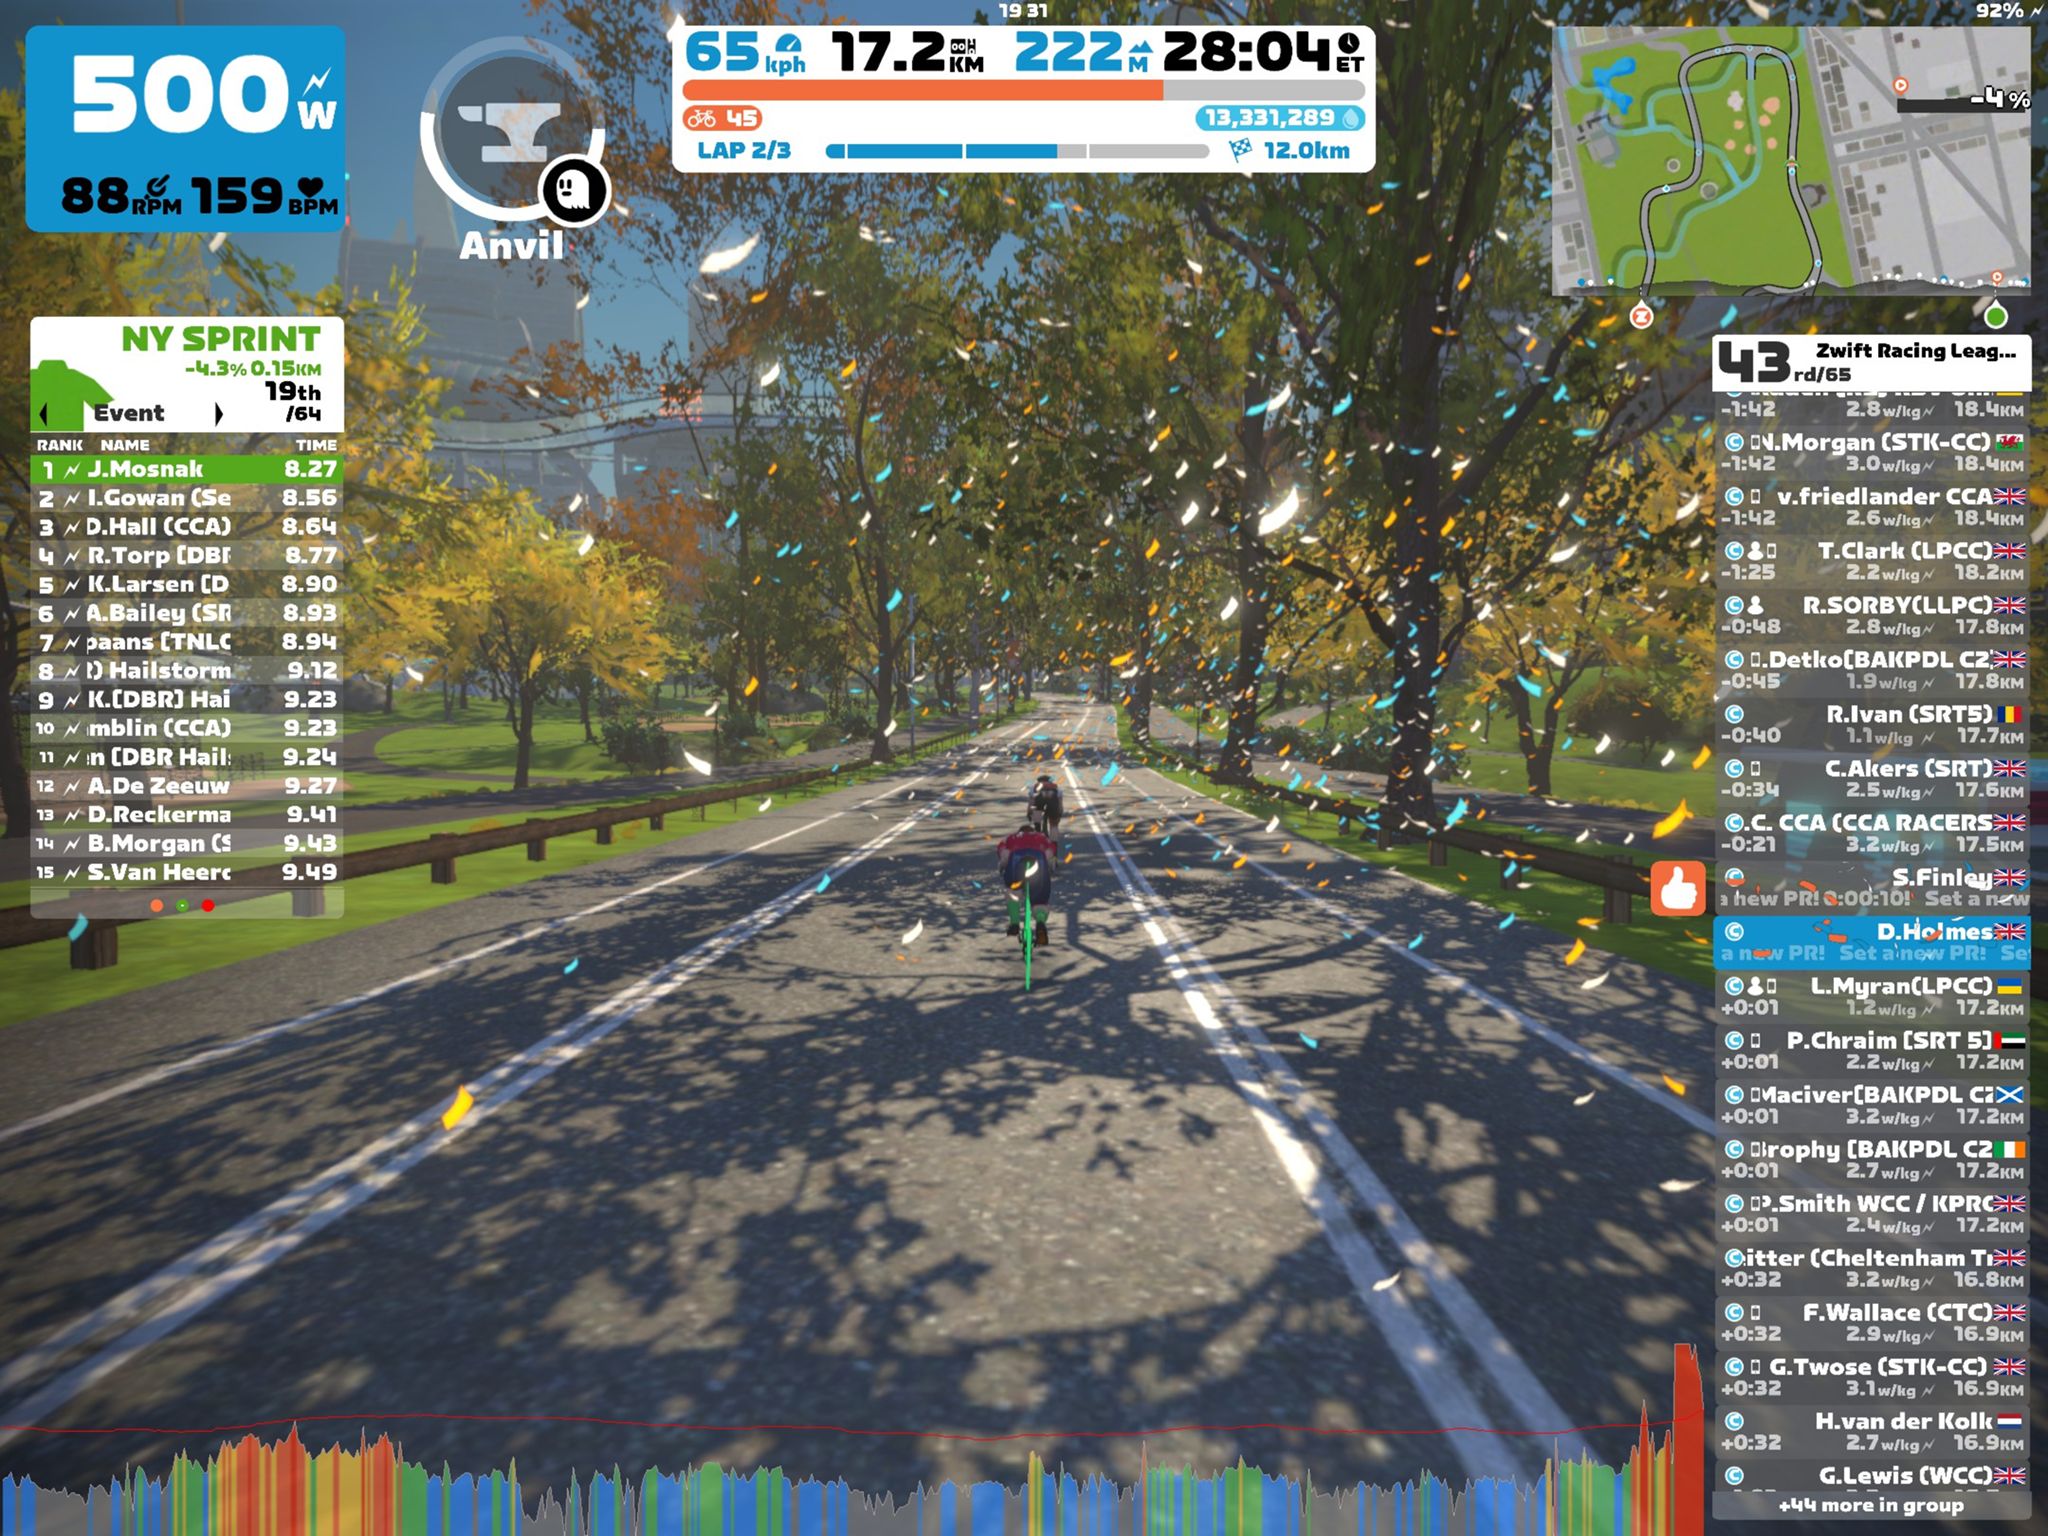 Episode 5: My First Experience With Zwift & Online Racing